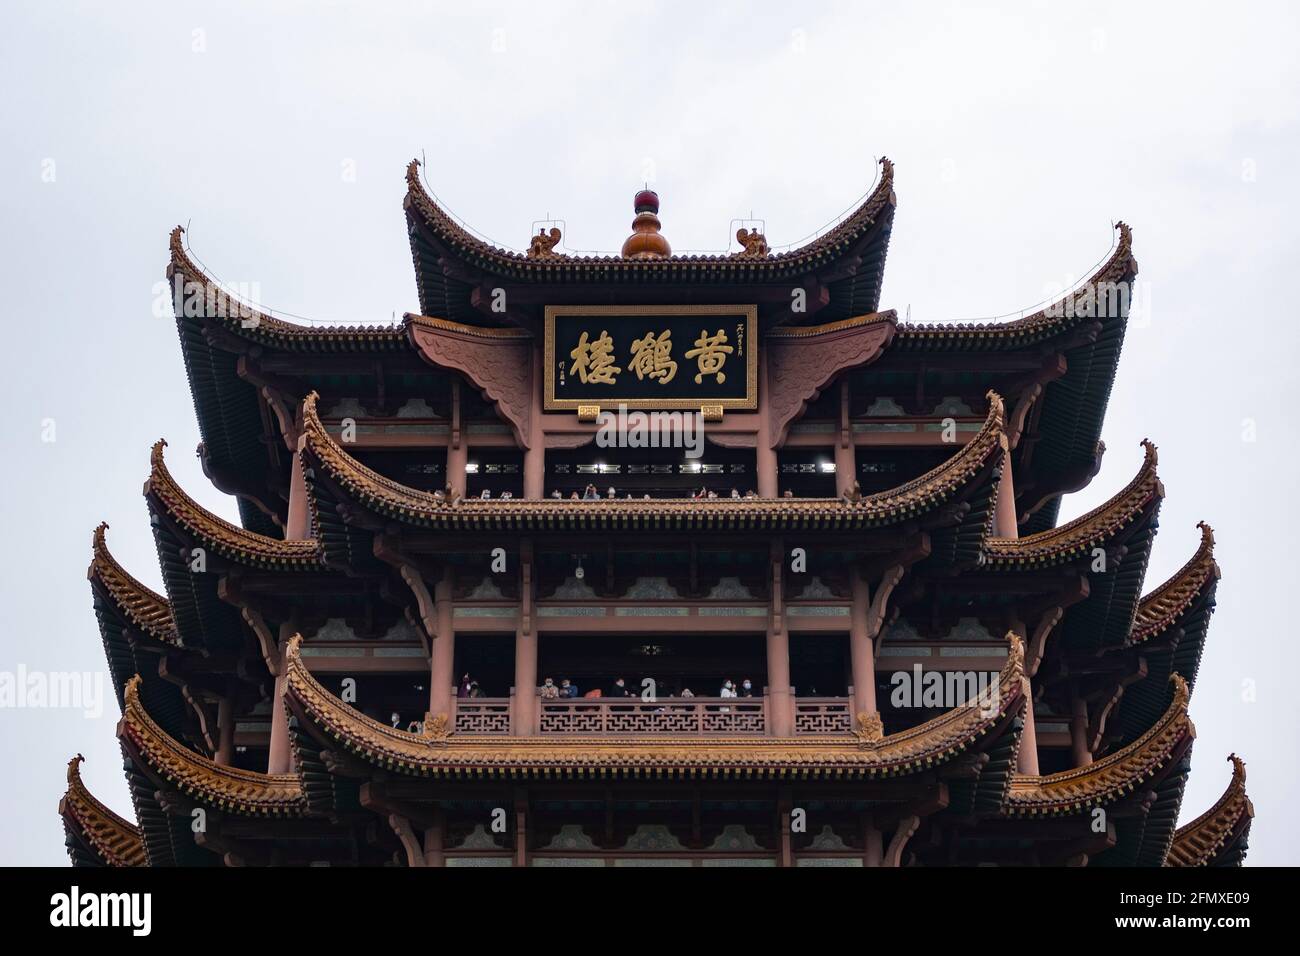 Yellow Crane Tower, located on Snake Hill in Wuhan Stock Photo